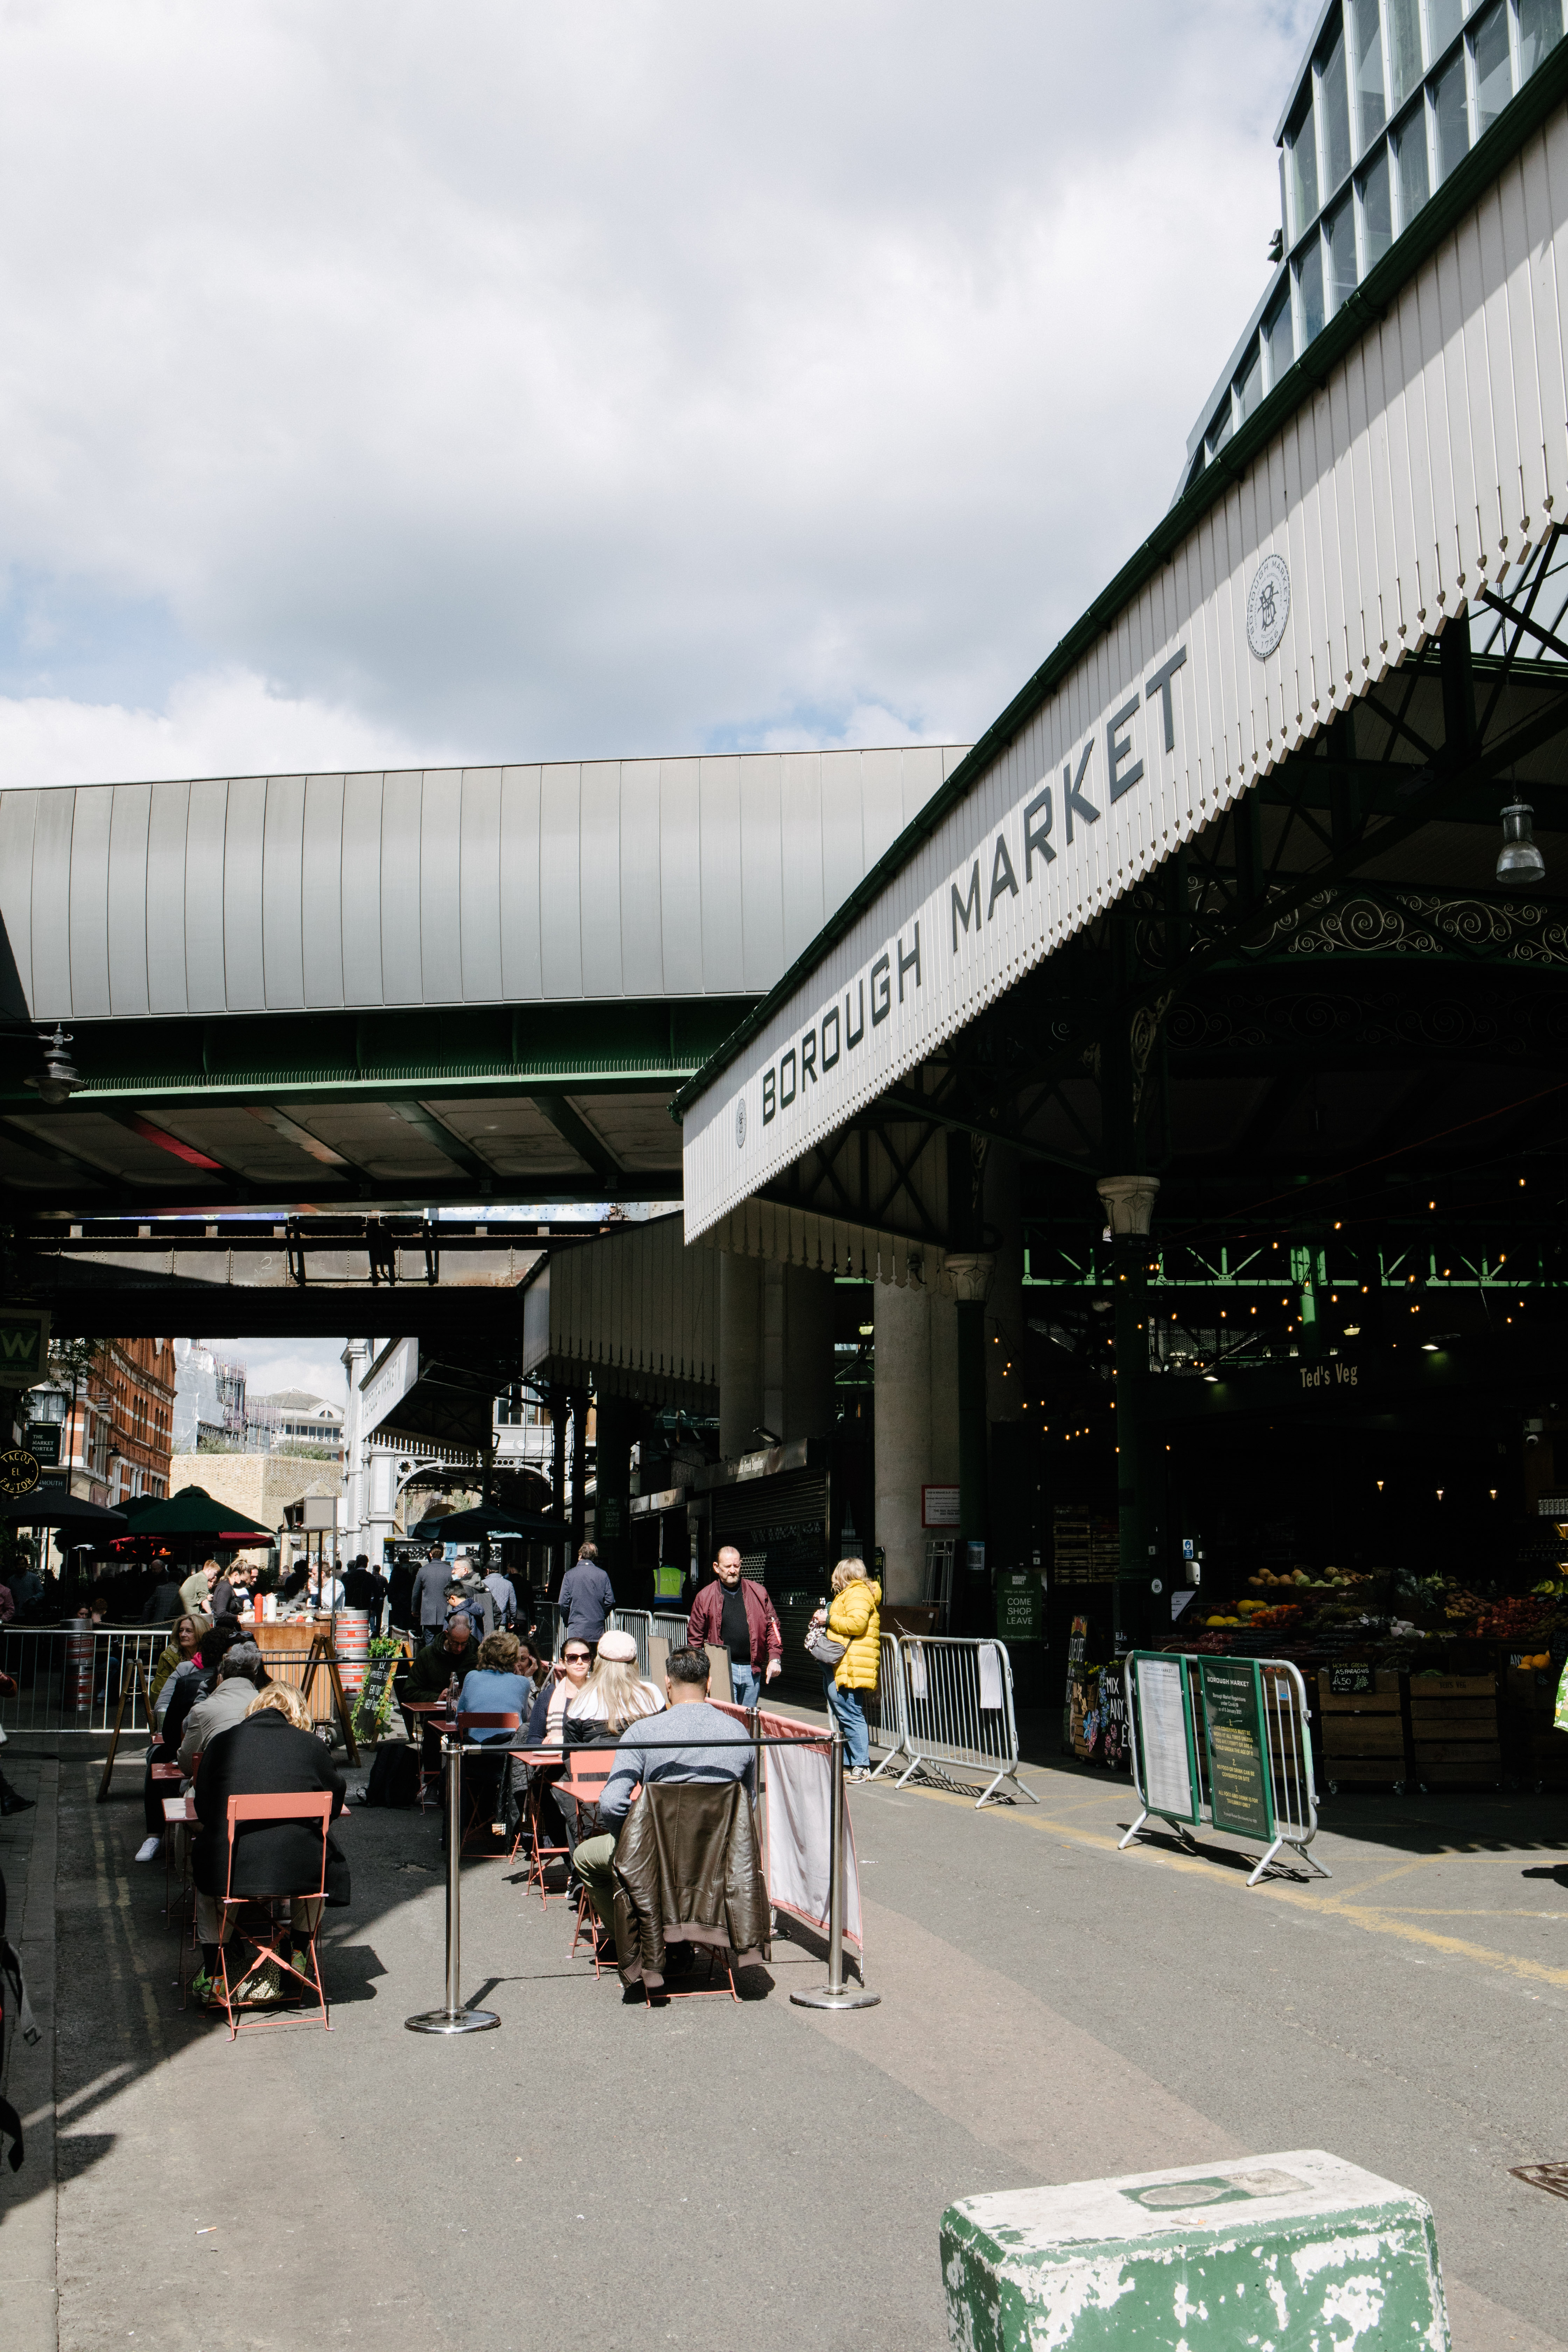 Guests sit at tables in Borough Market this week as London restaurants and pubs reopened for outdoor dining after four months of lockdown to halt the spread of coronavirus